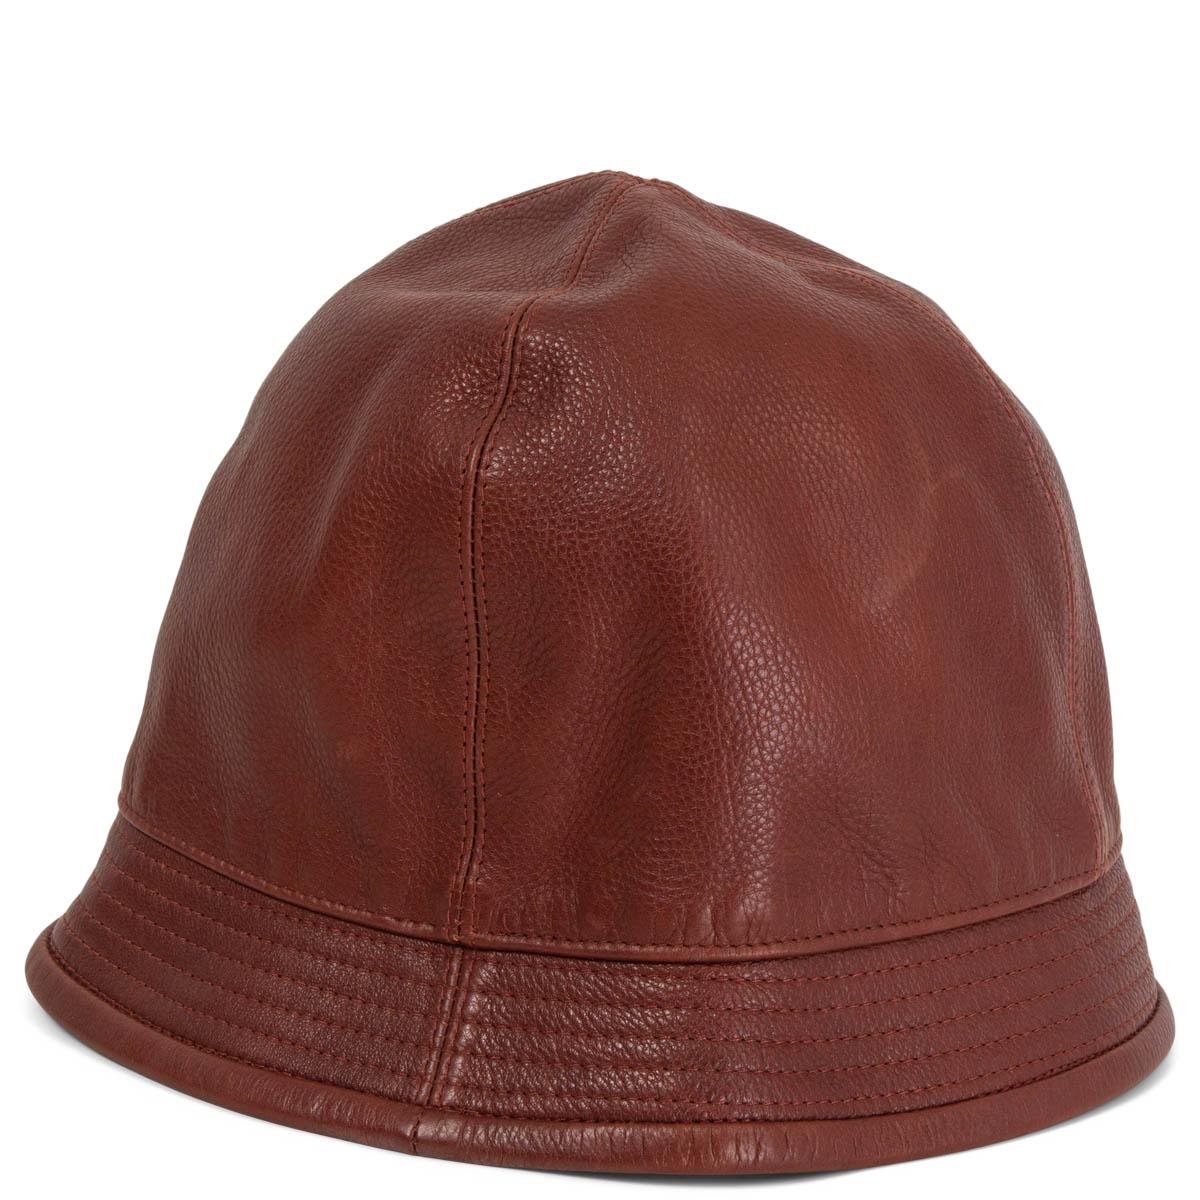 100% authentic Hermès Bucket Hat in Sienne chestnut brown grained leather. Has been worn and shows some wear on the lining. Overall in very good condition. 

Measurements
Tag Size	57
Inside Circumference	57cm (22.2in)

All our listings include only